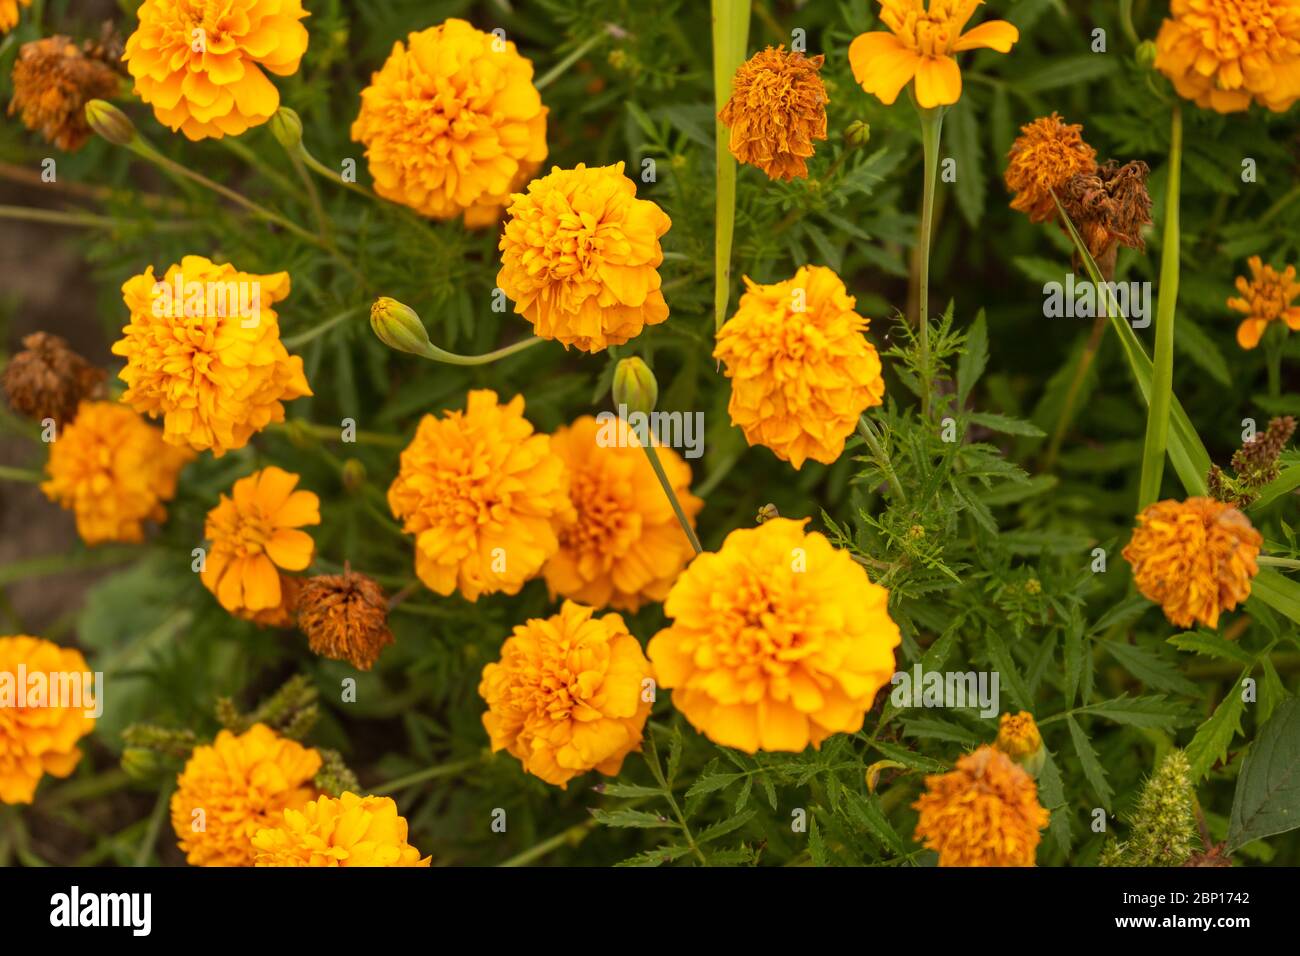 Marigold flowers in Ukraine during cloudy day. August 2019 Stock Photo